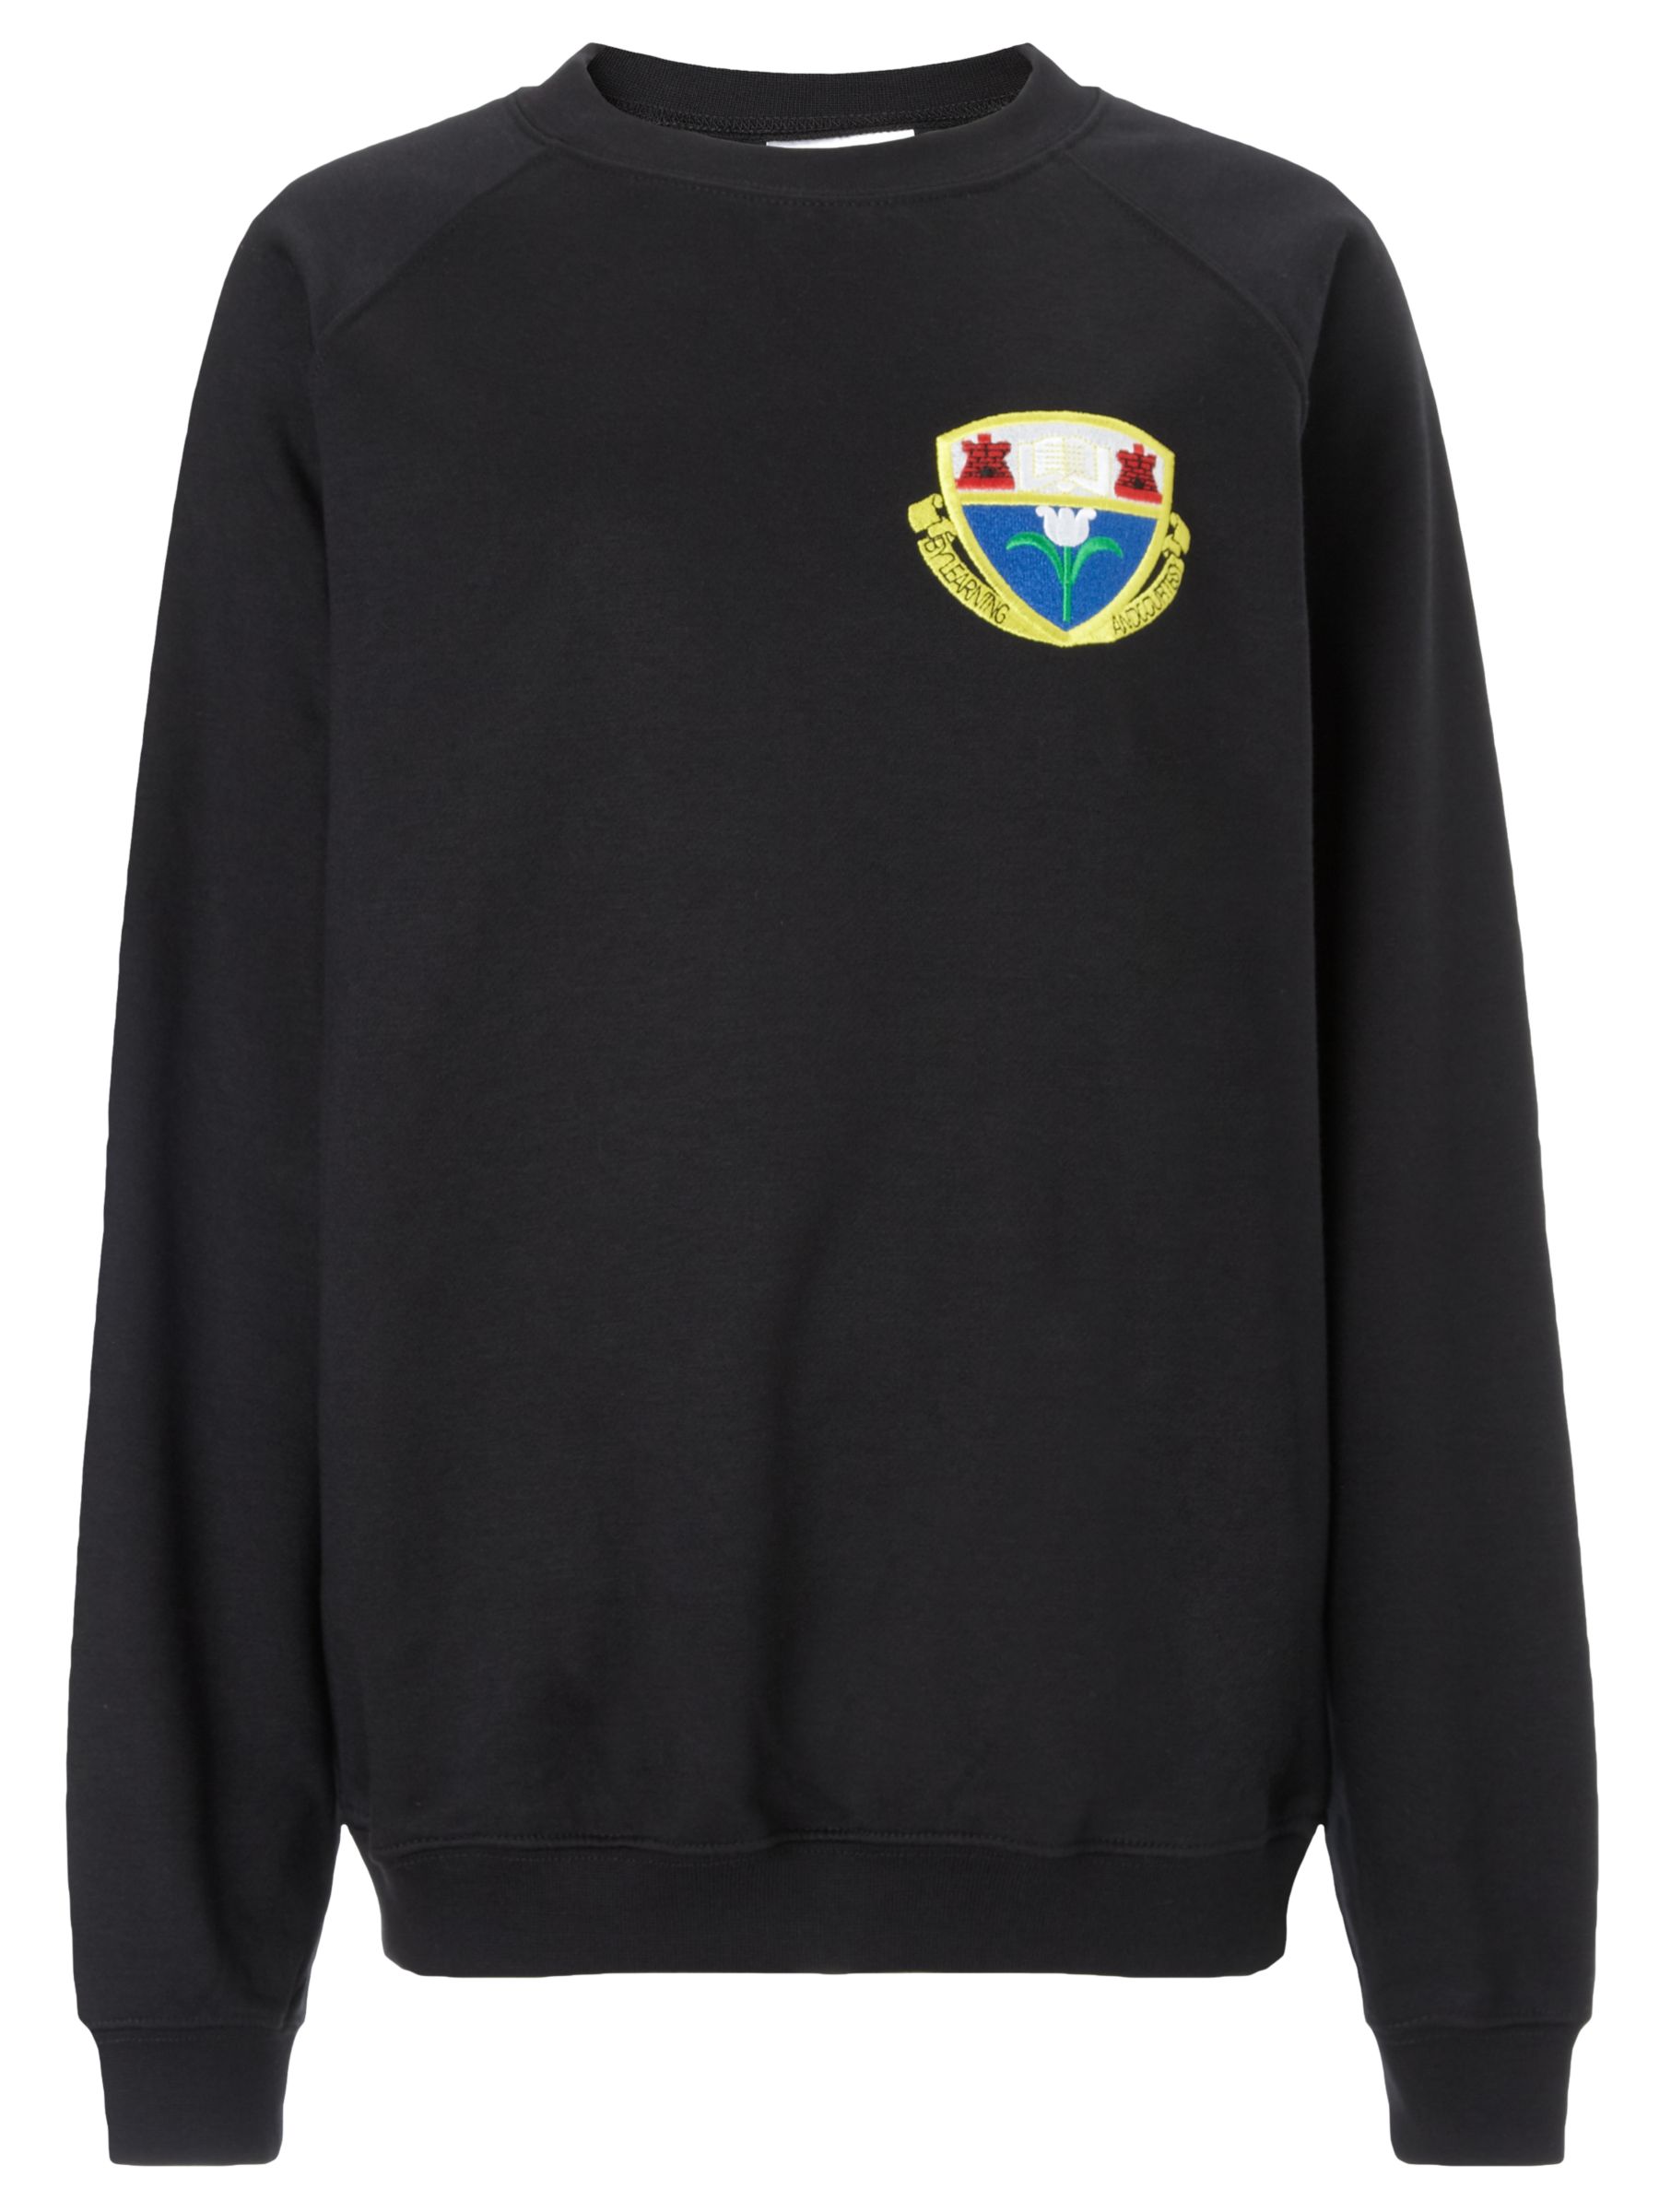 Harlaw Academy Jumper Reviews